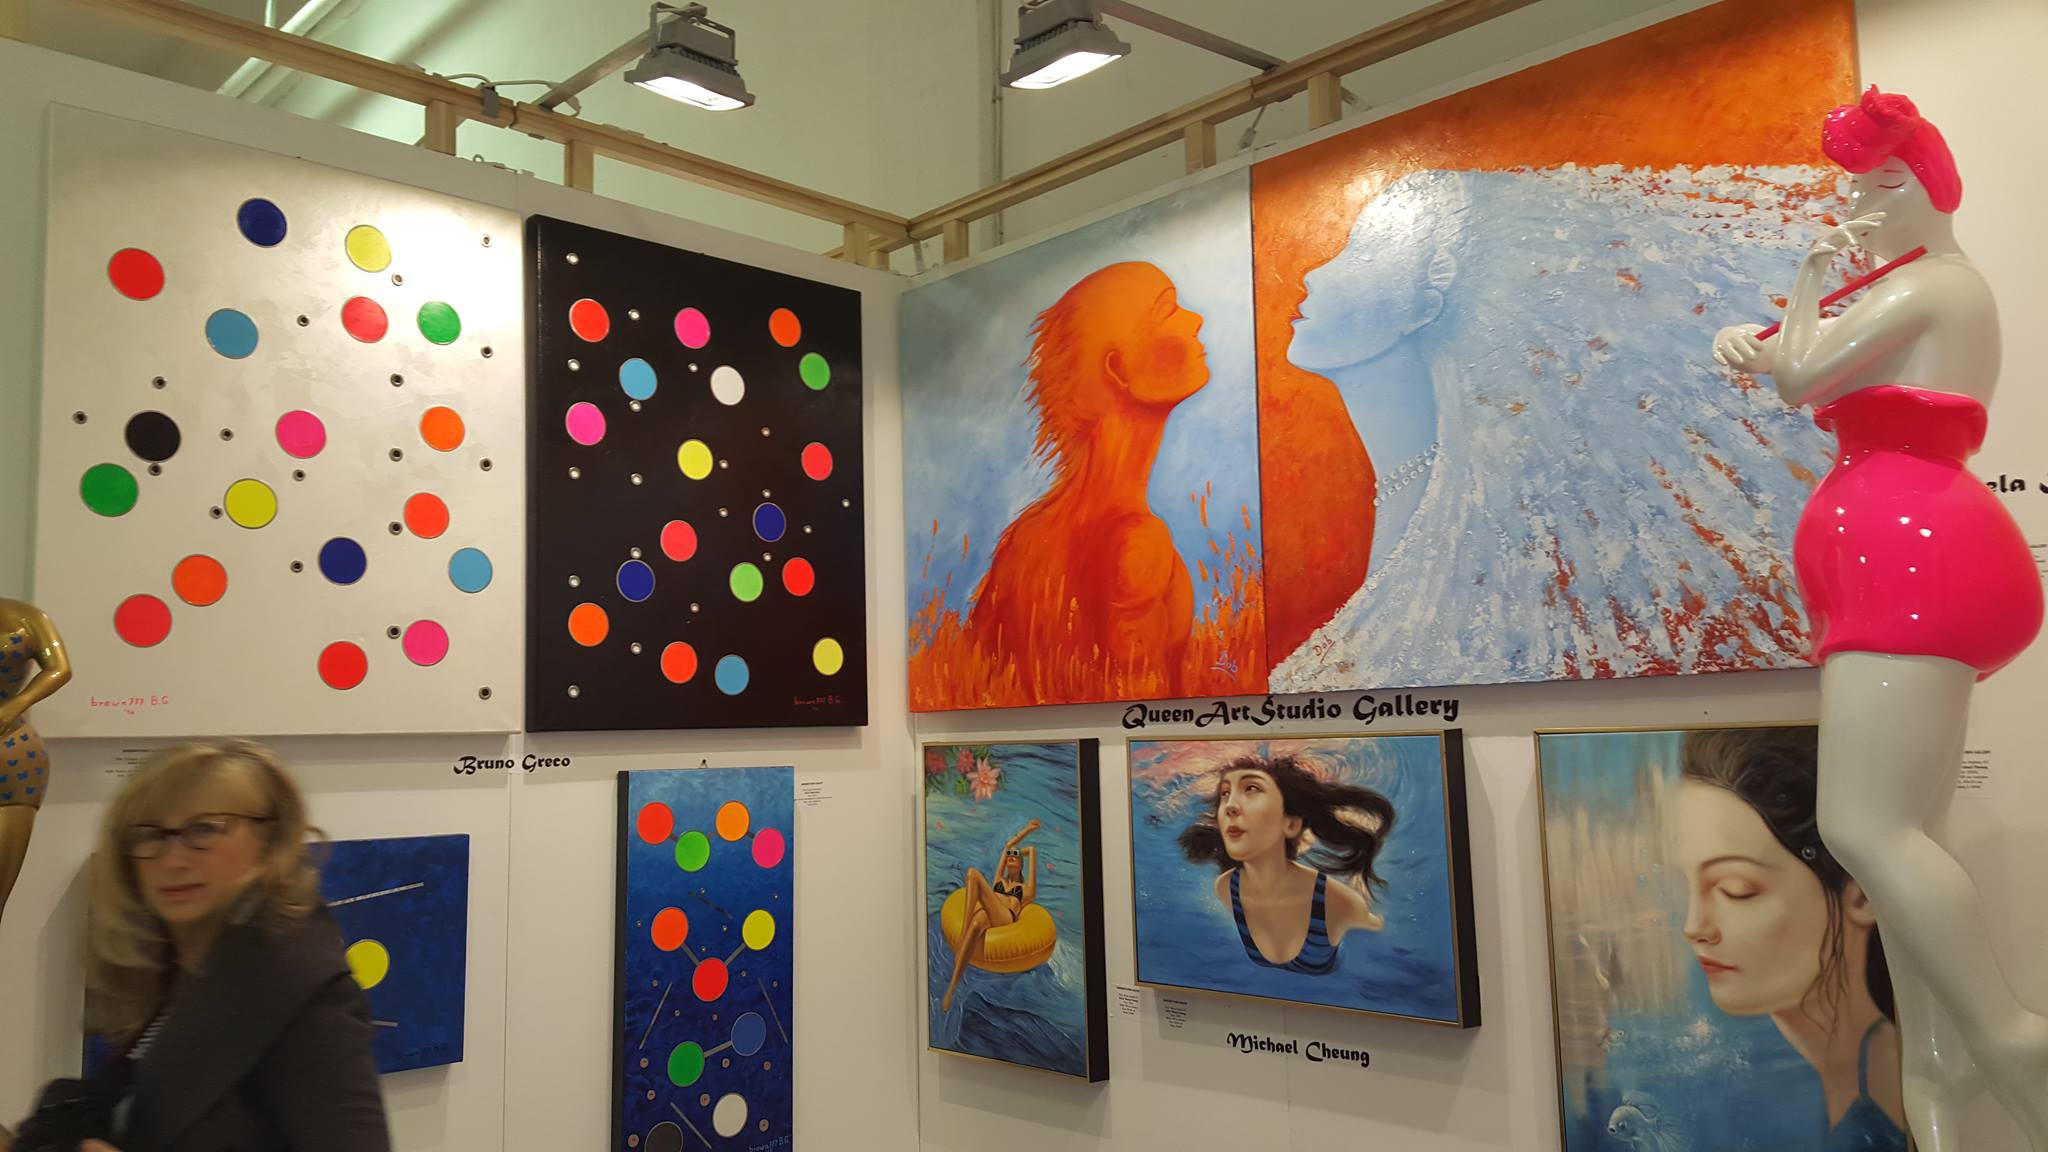  March 2016 Affordable Art Fair , Queen Art Studio Gallery booth, Milan, Italy 